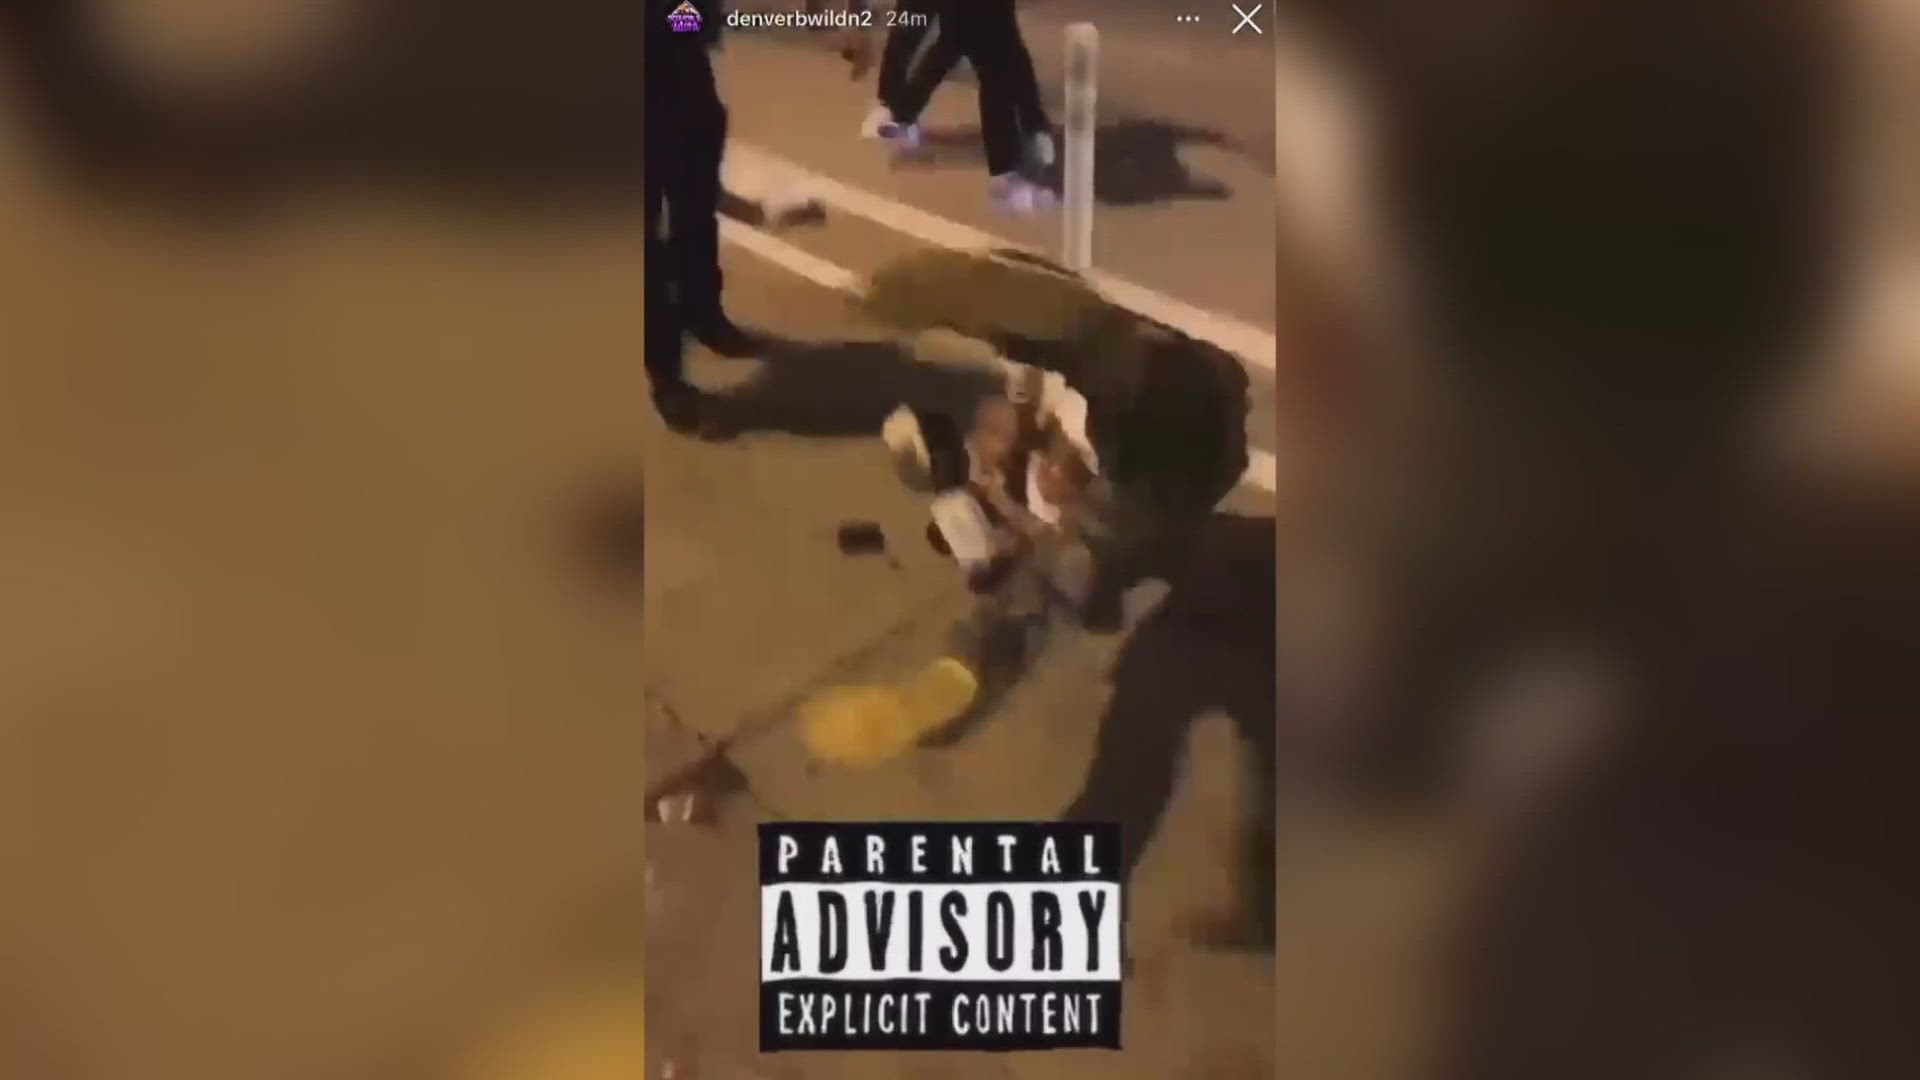 Denver Officer Adam Glasby is seen in video picking up Elijah Smith and throwing him to the ground.